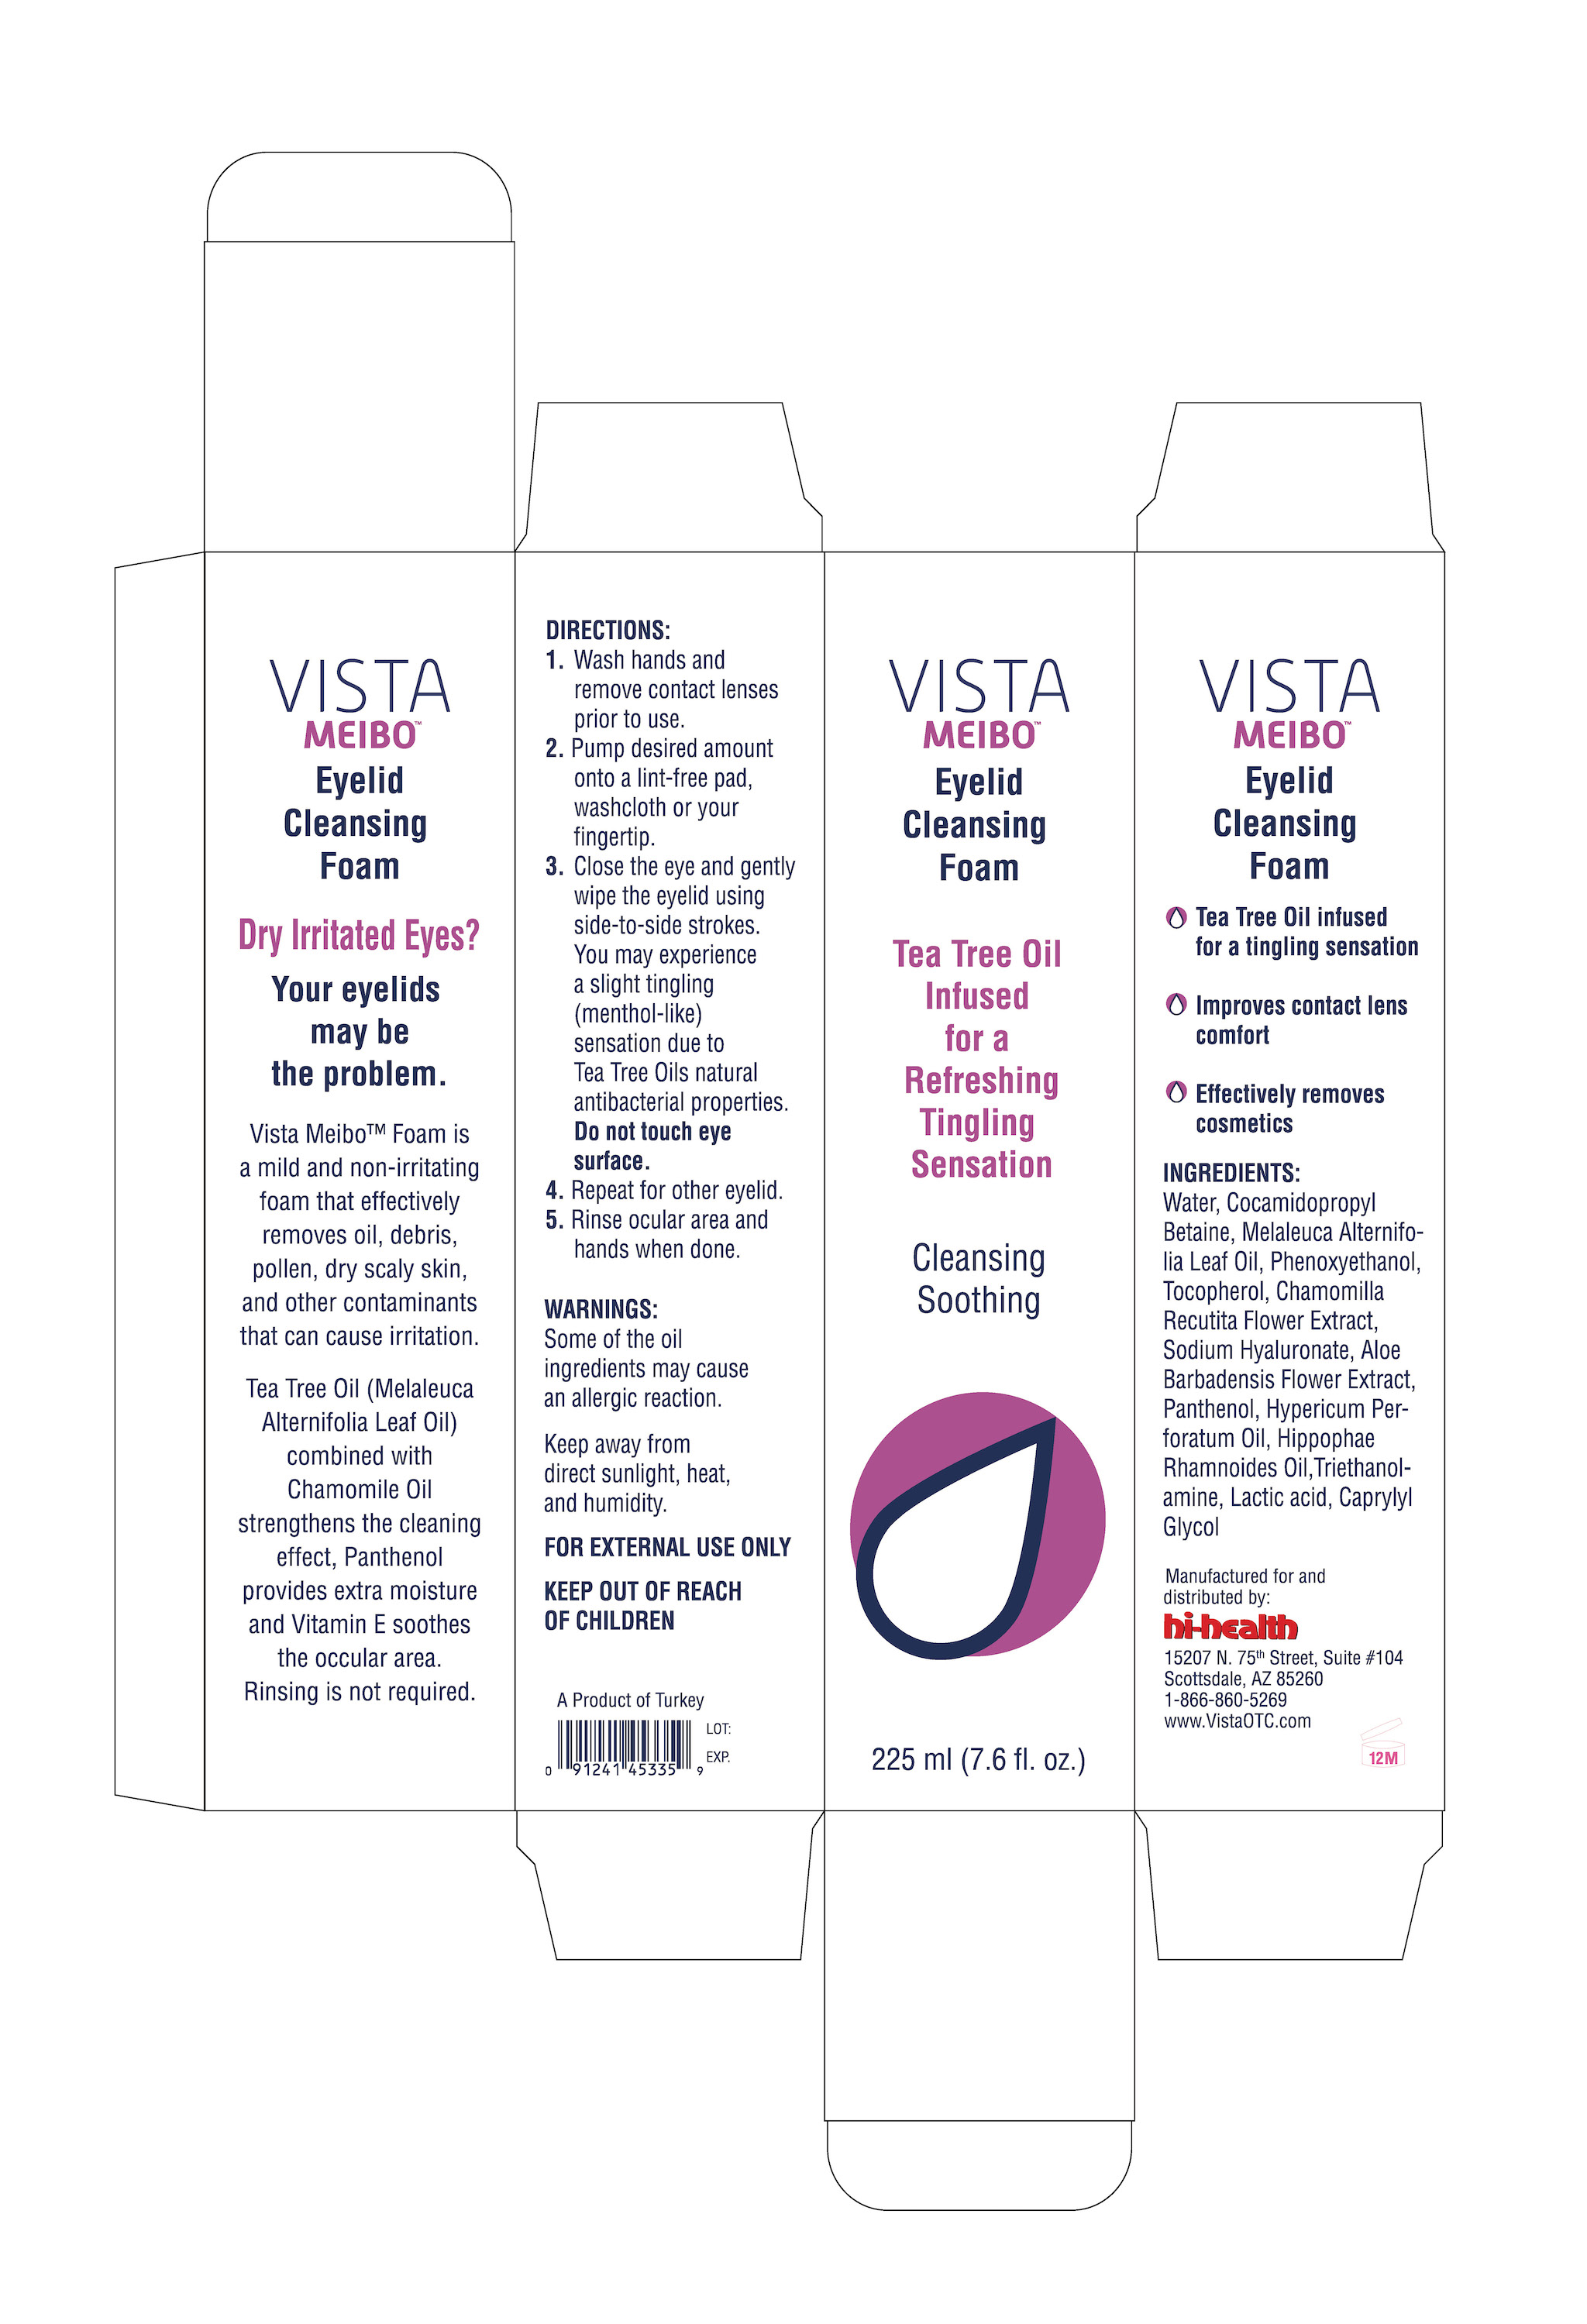 Outer Box for Vista Meibo Eyelid Cleansing Foam 77790-006-22